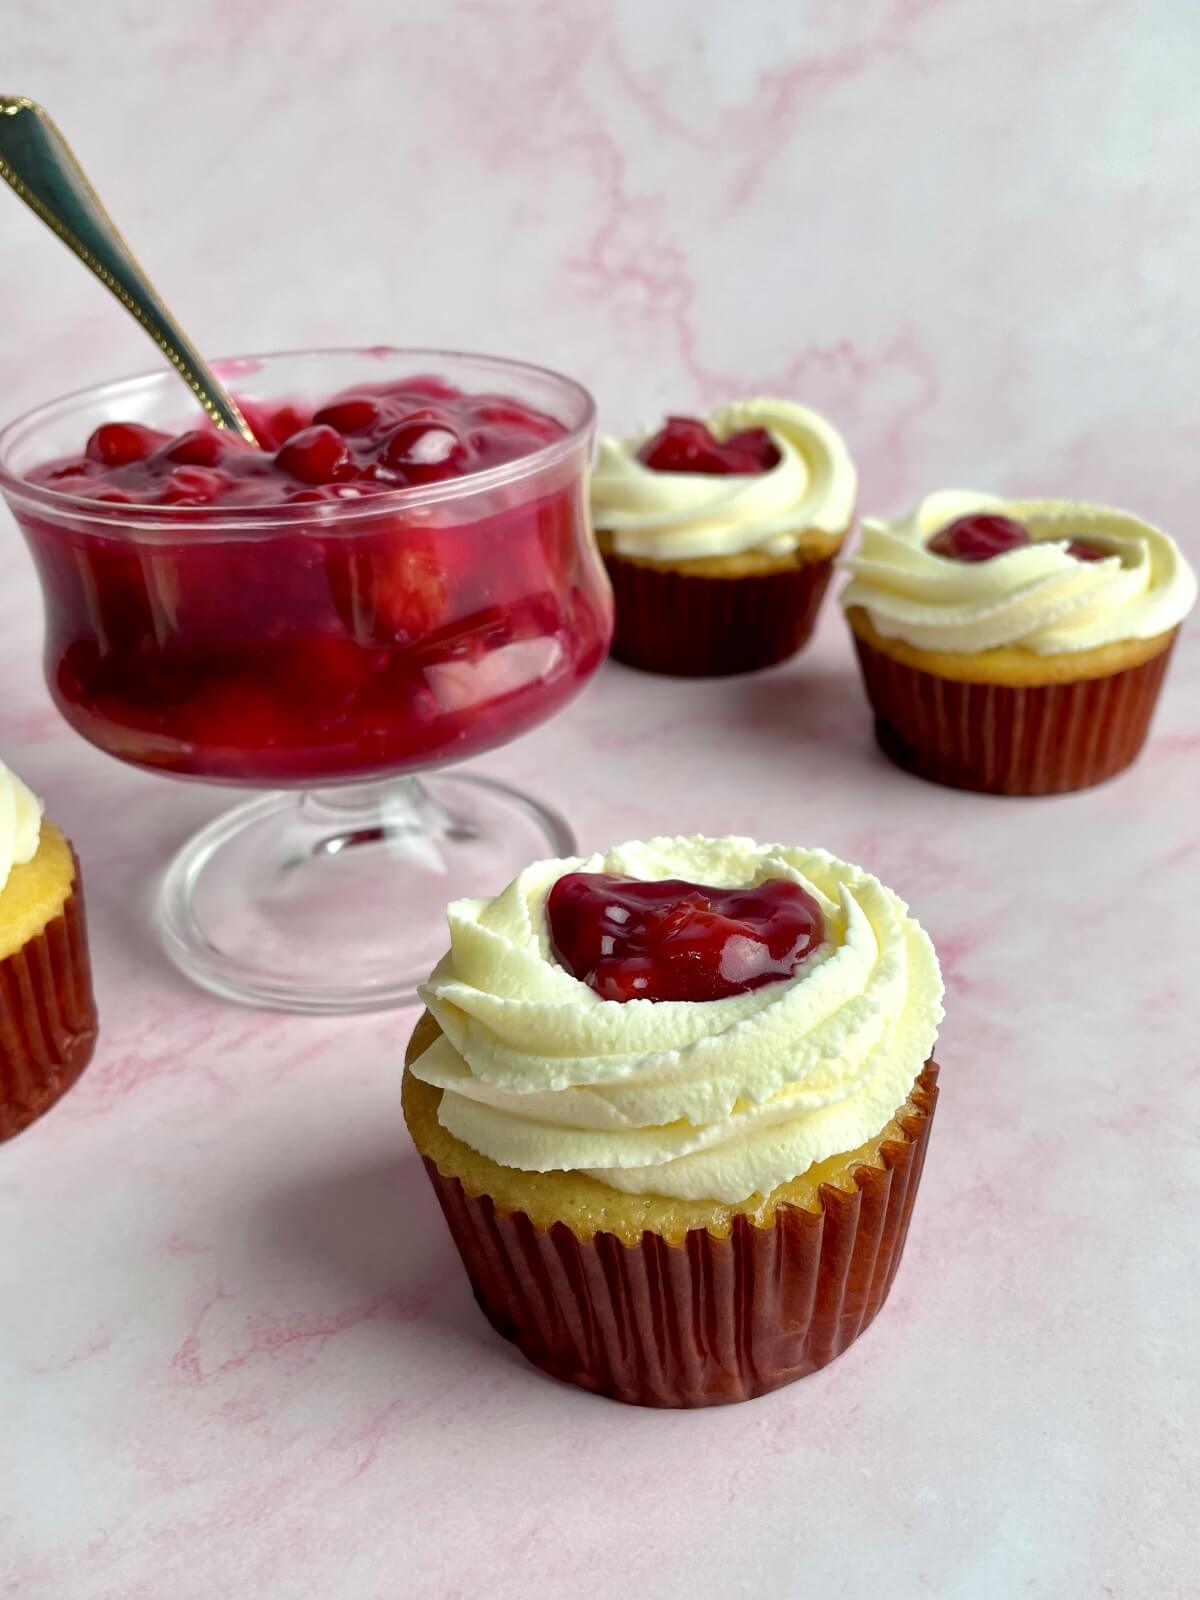 several vanilla cupakes with a dollop of homemade cherry cake filling on top of each cupcake, and a bowl of cherry filling in the background